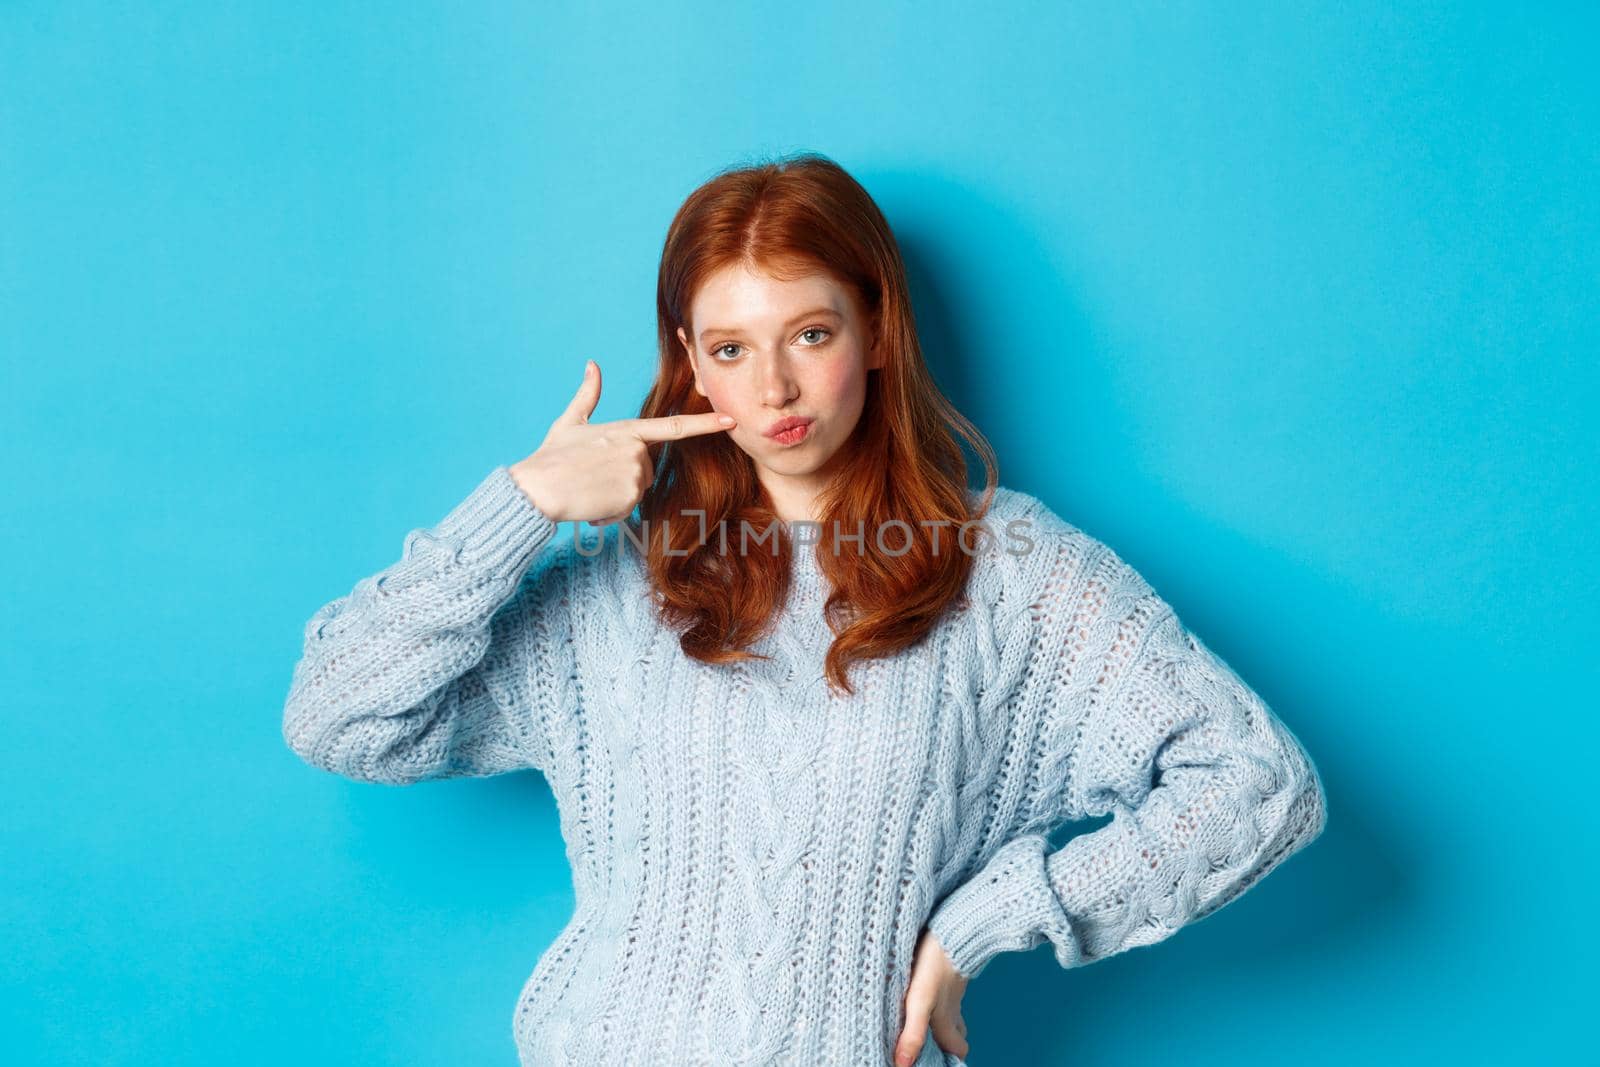 Cute redhead girl in sweater poking her cheek, staring at camera sassy, standing over blue background.